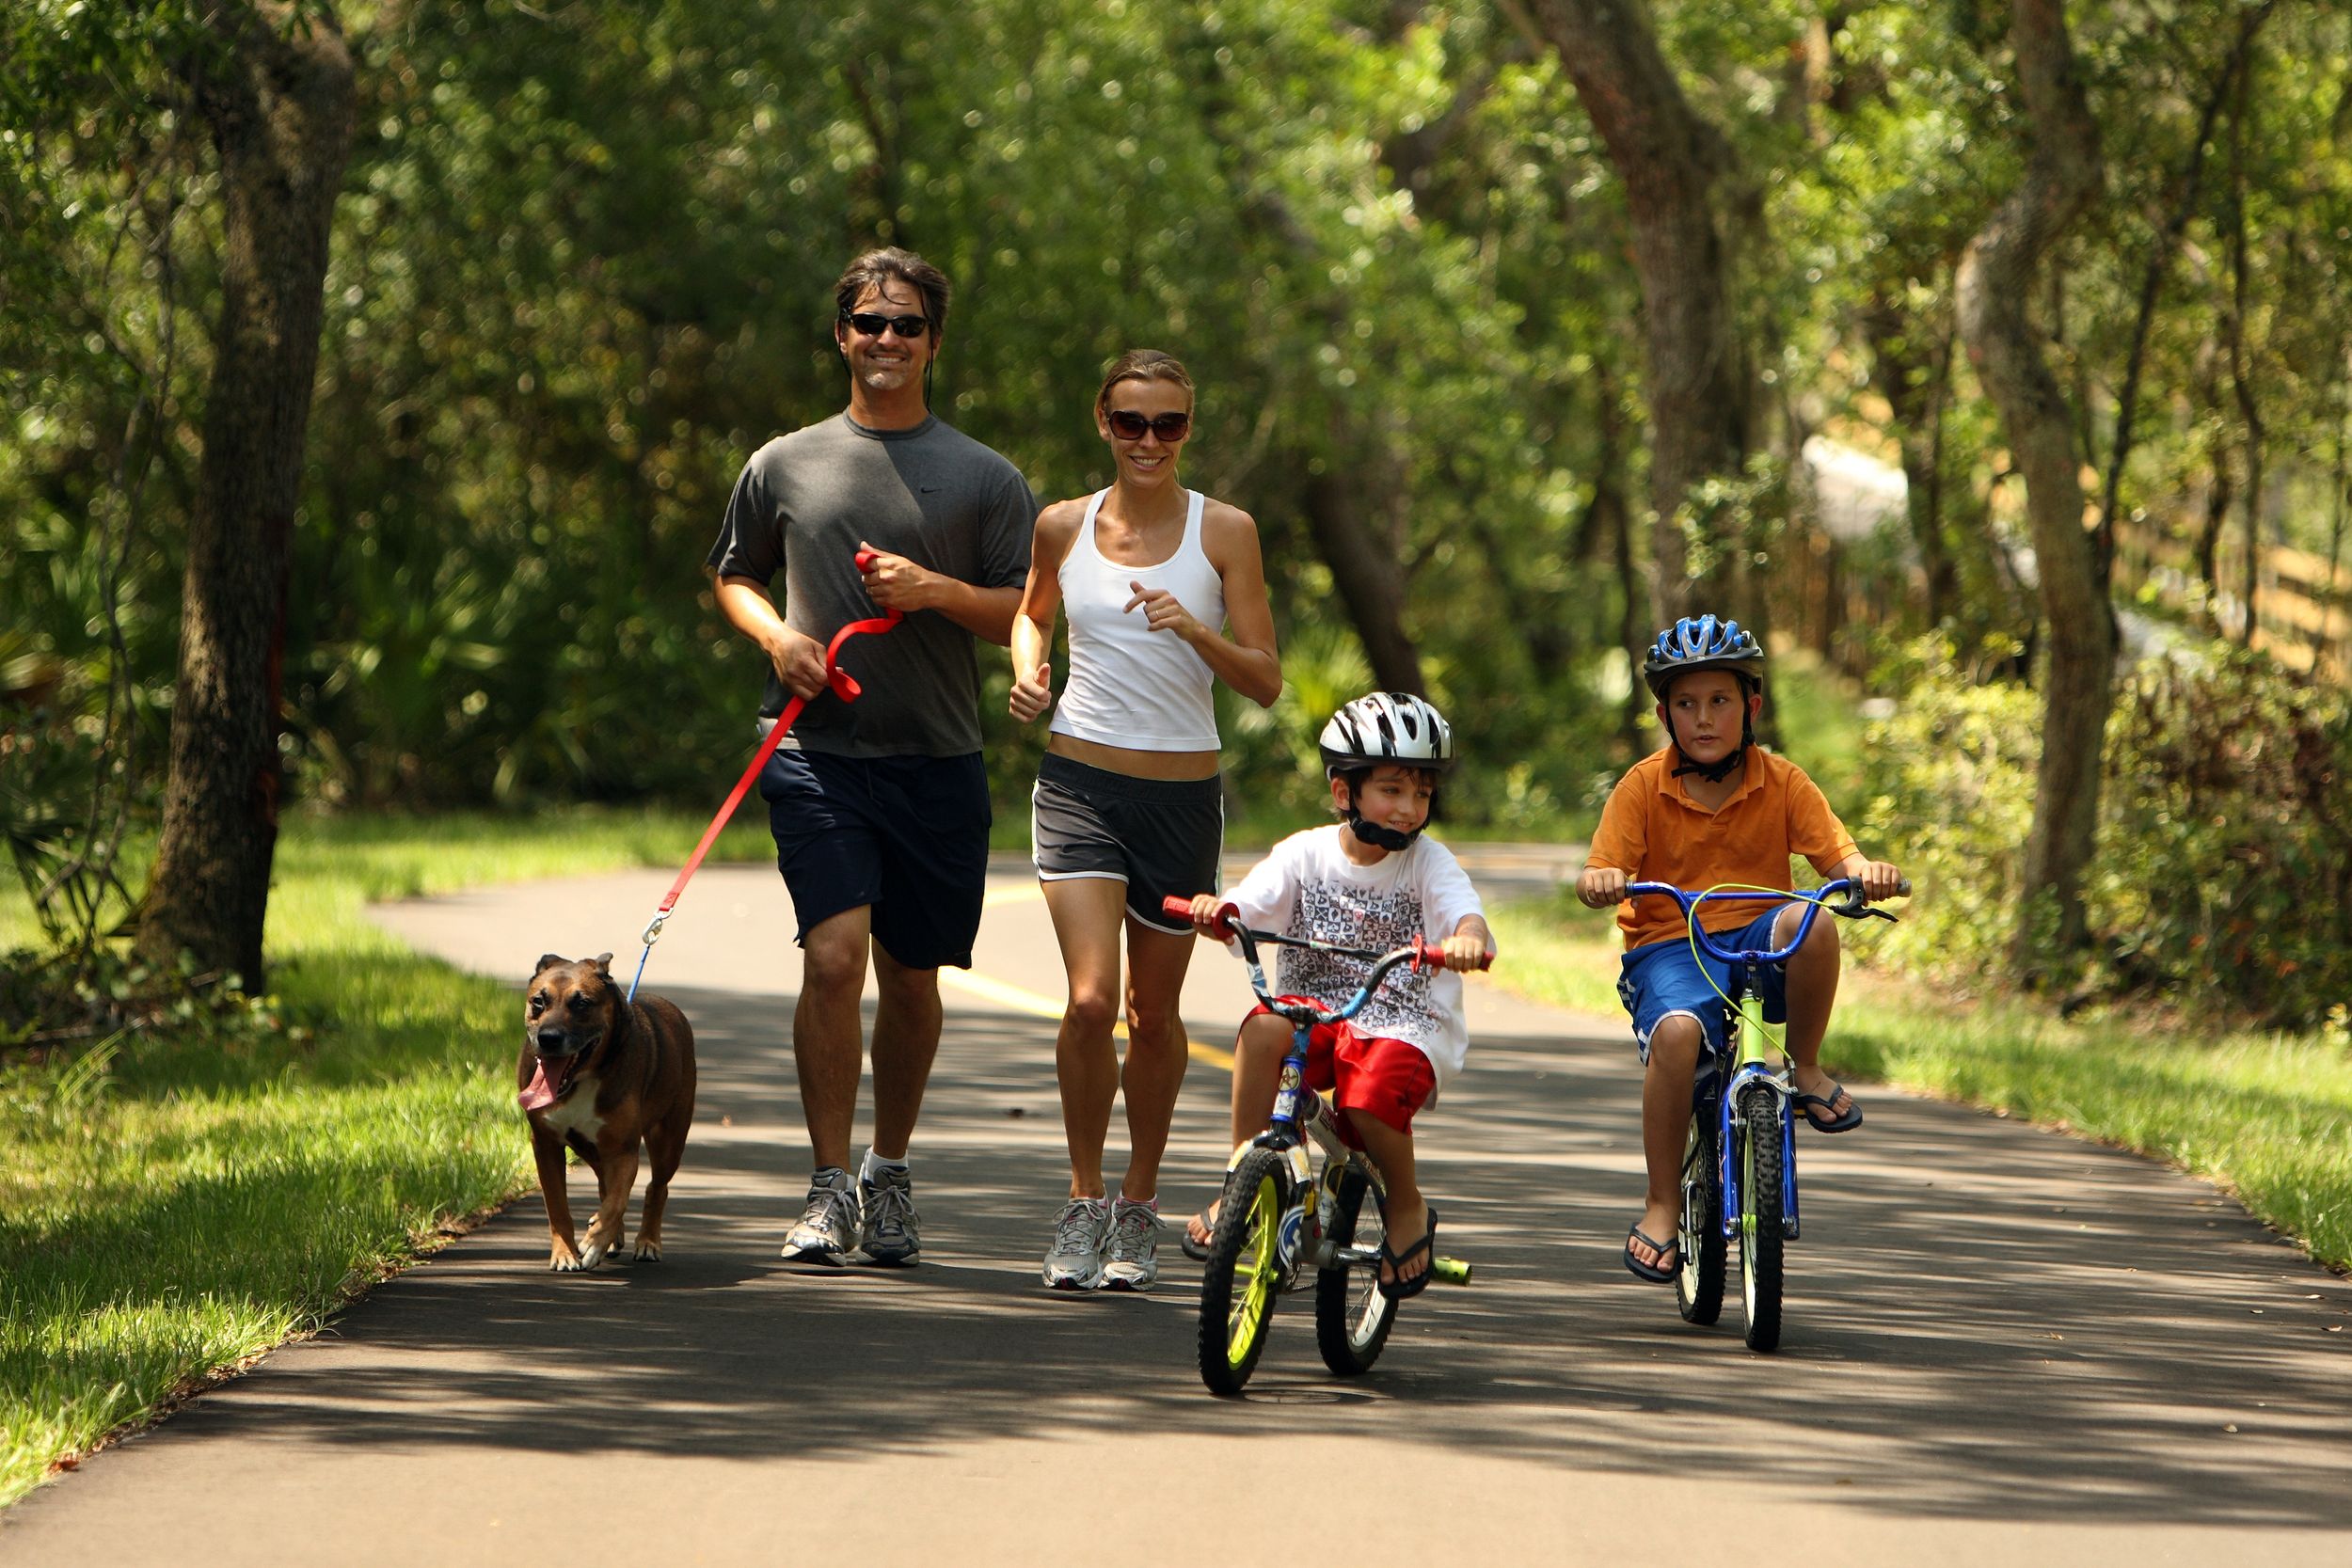 Parents running with dogs and children biking on a shady street.